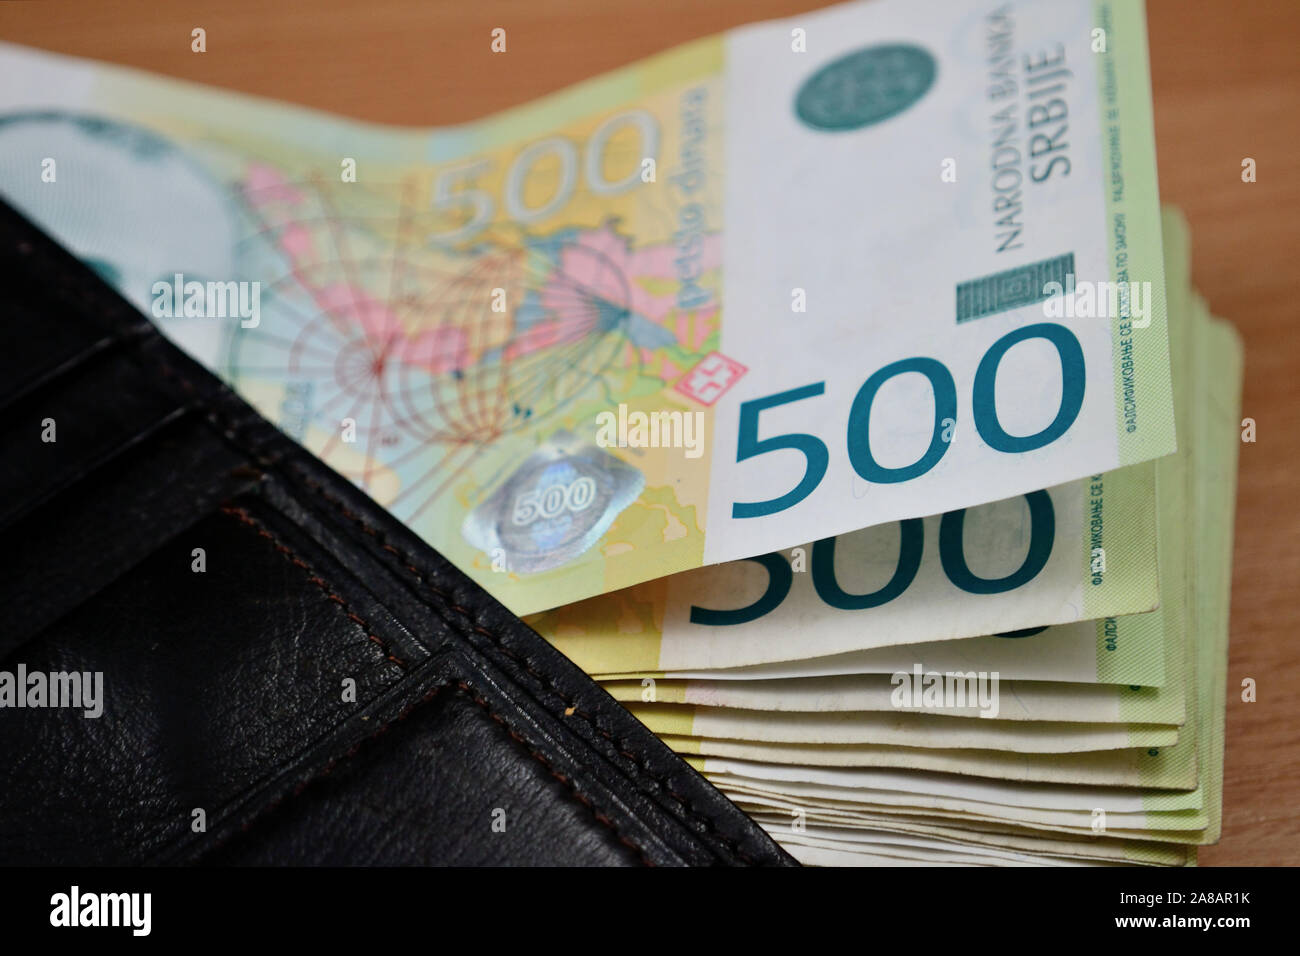 Wallet with Serbian money Stock Photo